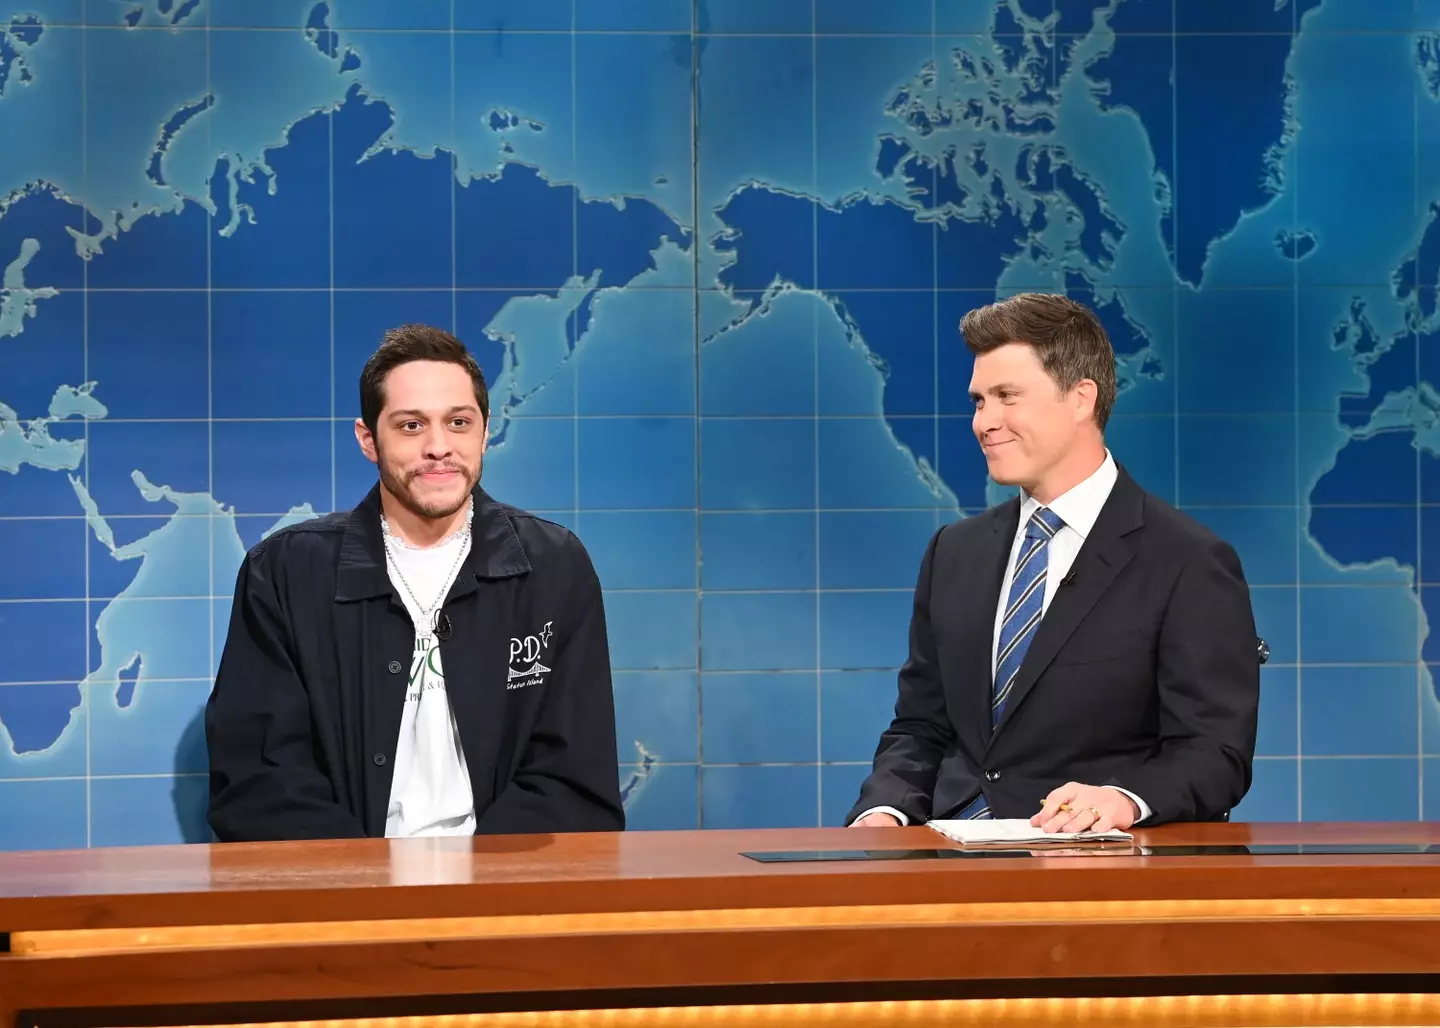 Pete Davidson was expected to return to SNL this week.